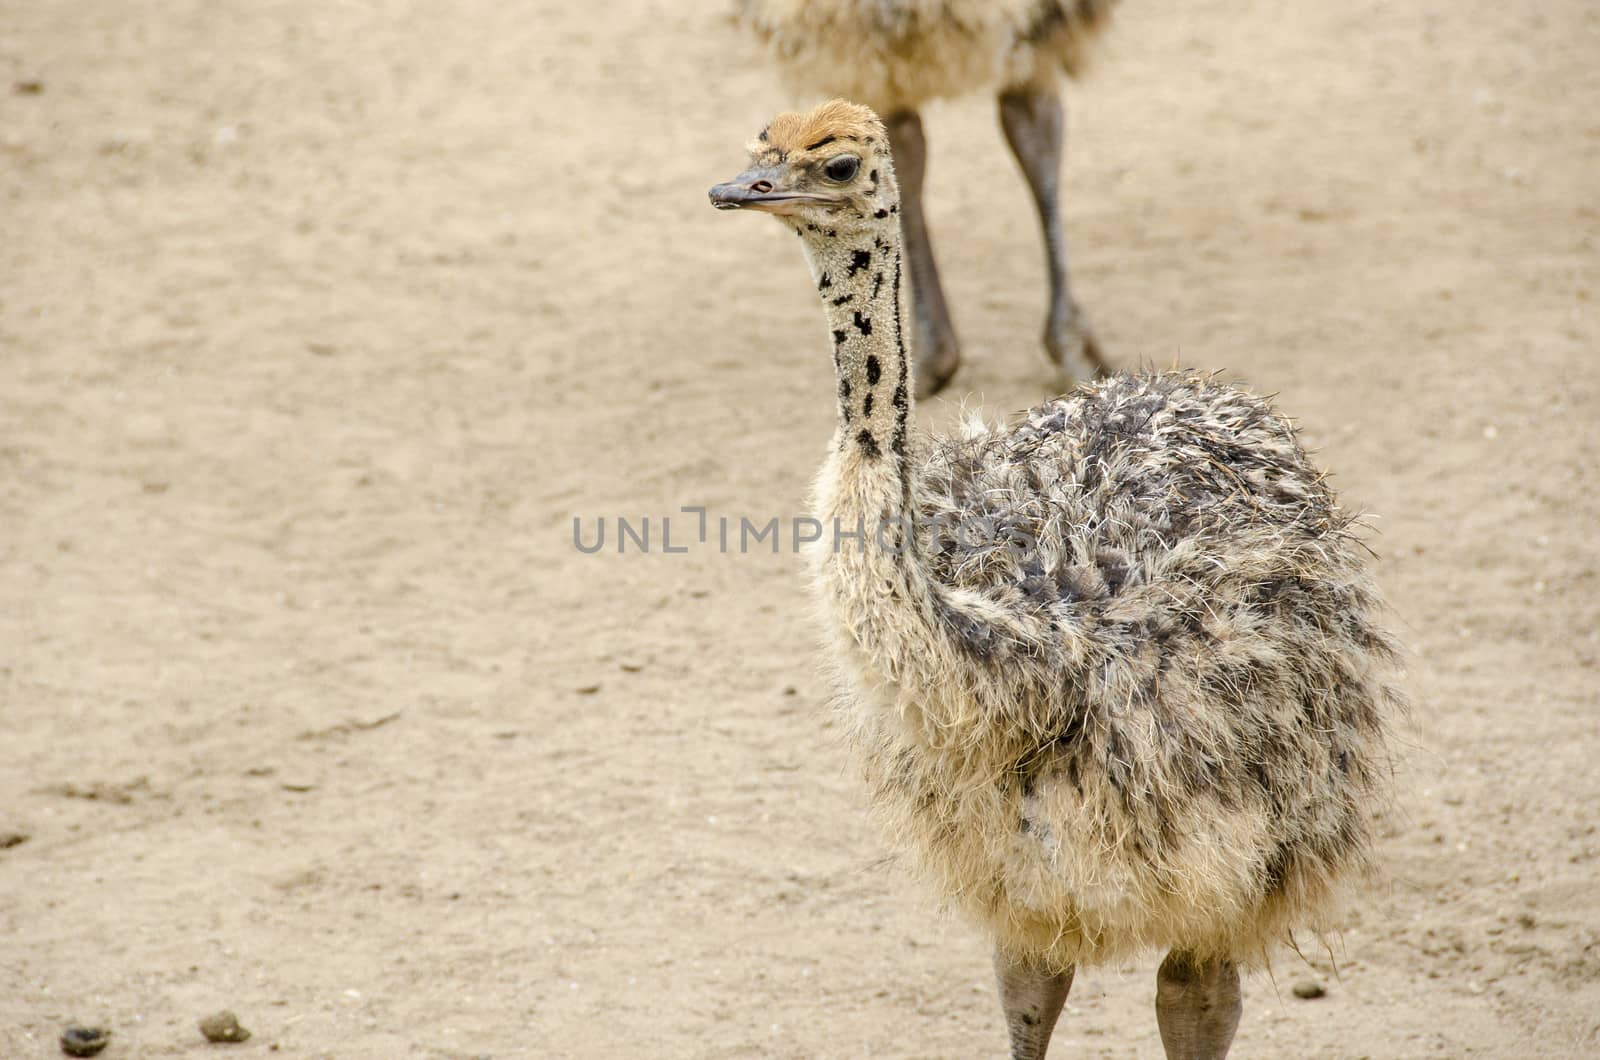 Small cute baby ostrich, Struthio camelus walking on sand